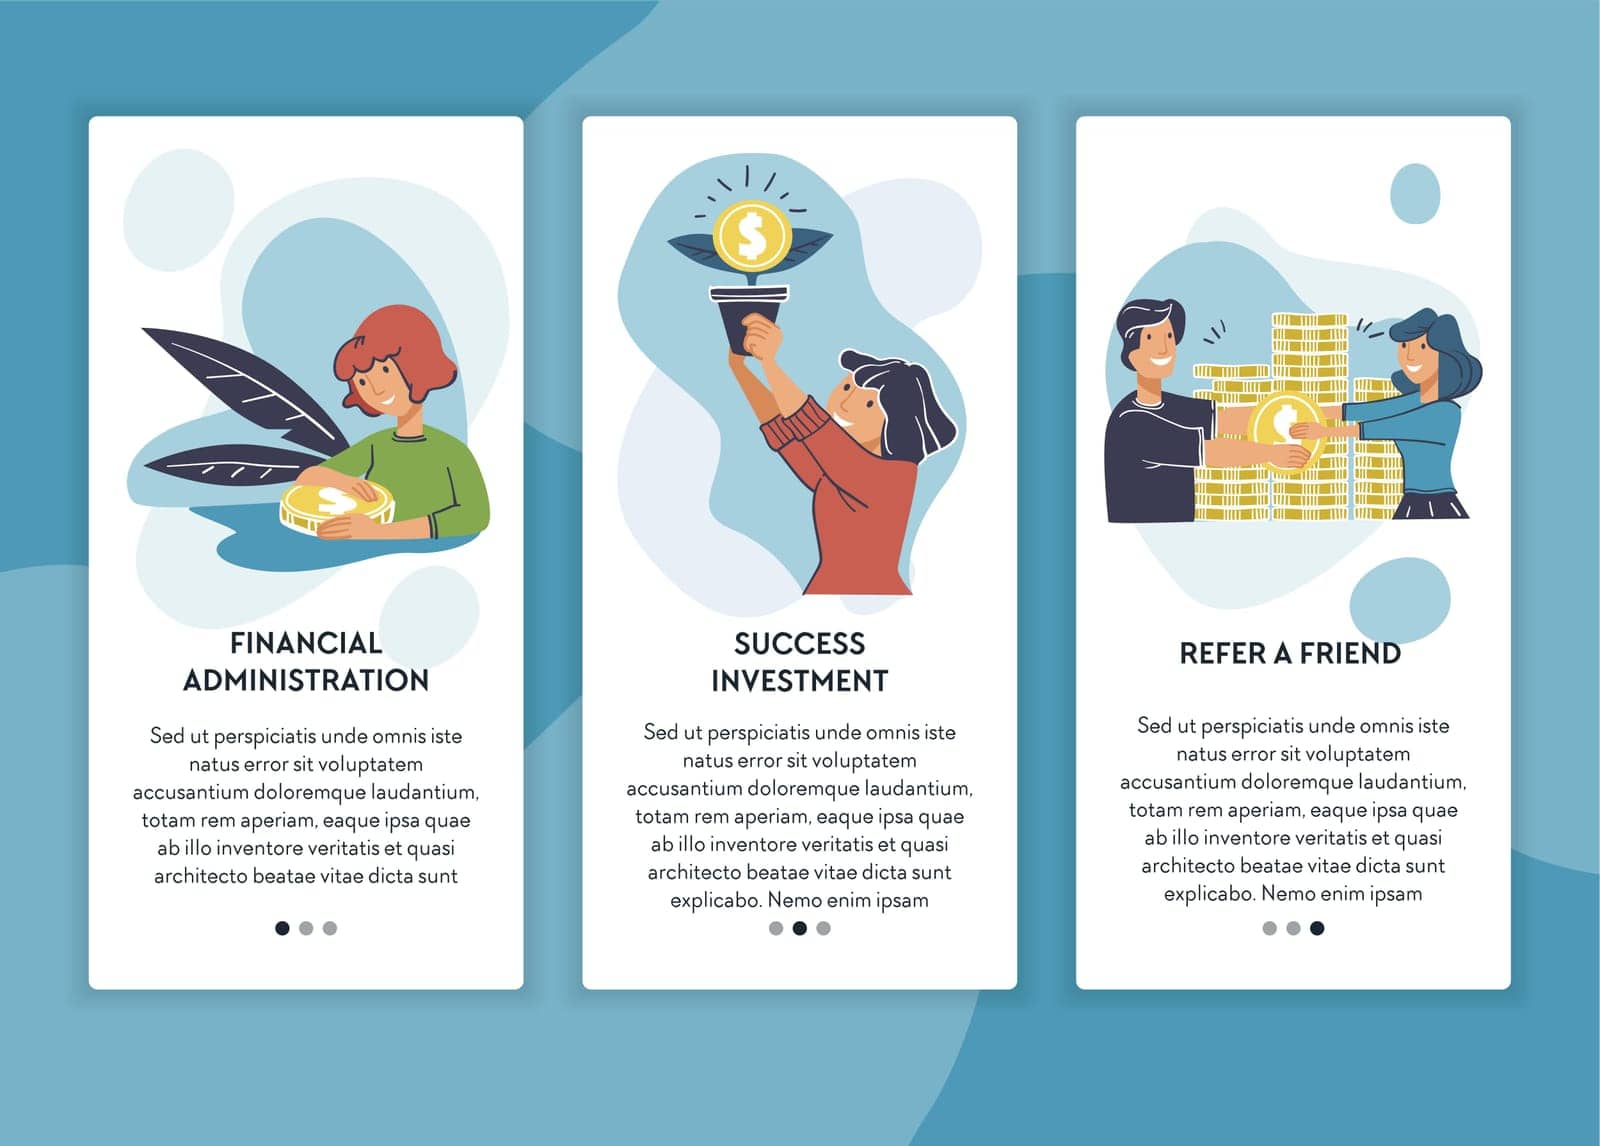 Financial administration and success at investing, refer a friend. Saving money and bringing new clients, getting bonuses. Story or post in social media, rectangular formats. Vector in flat style